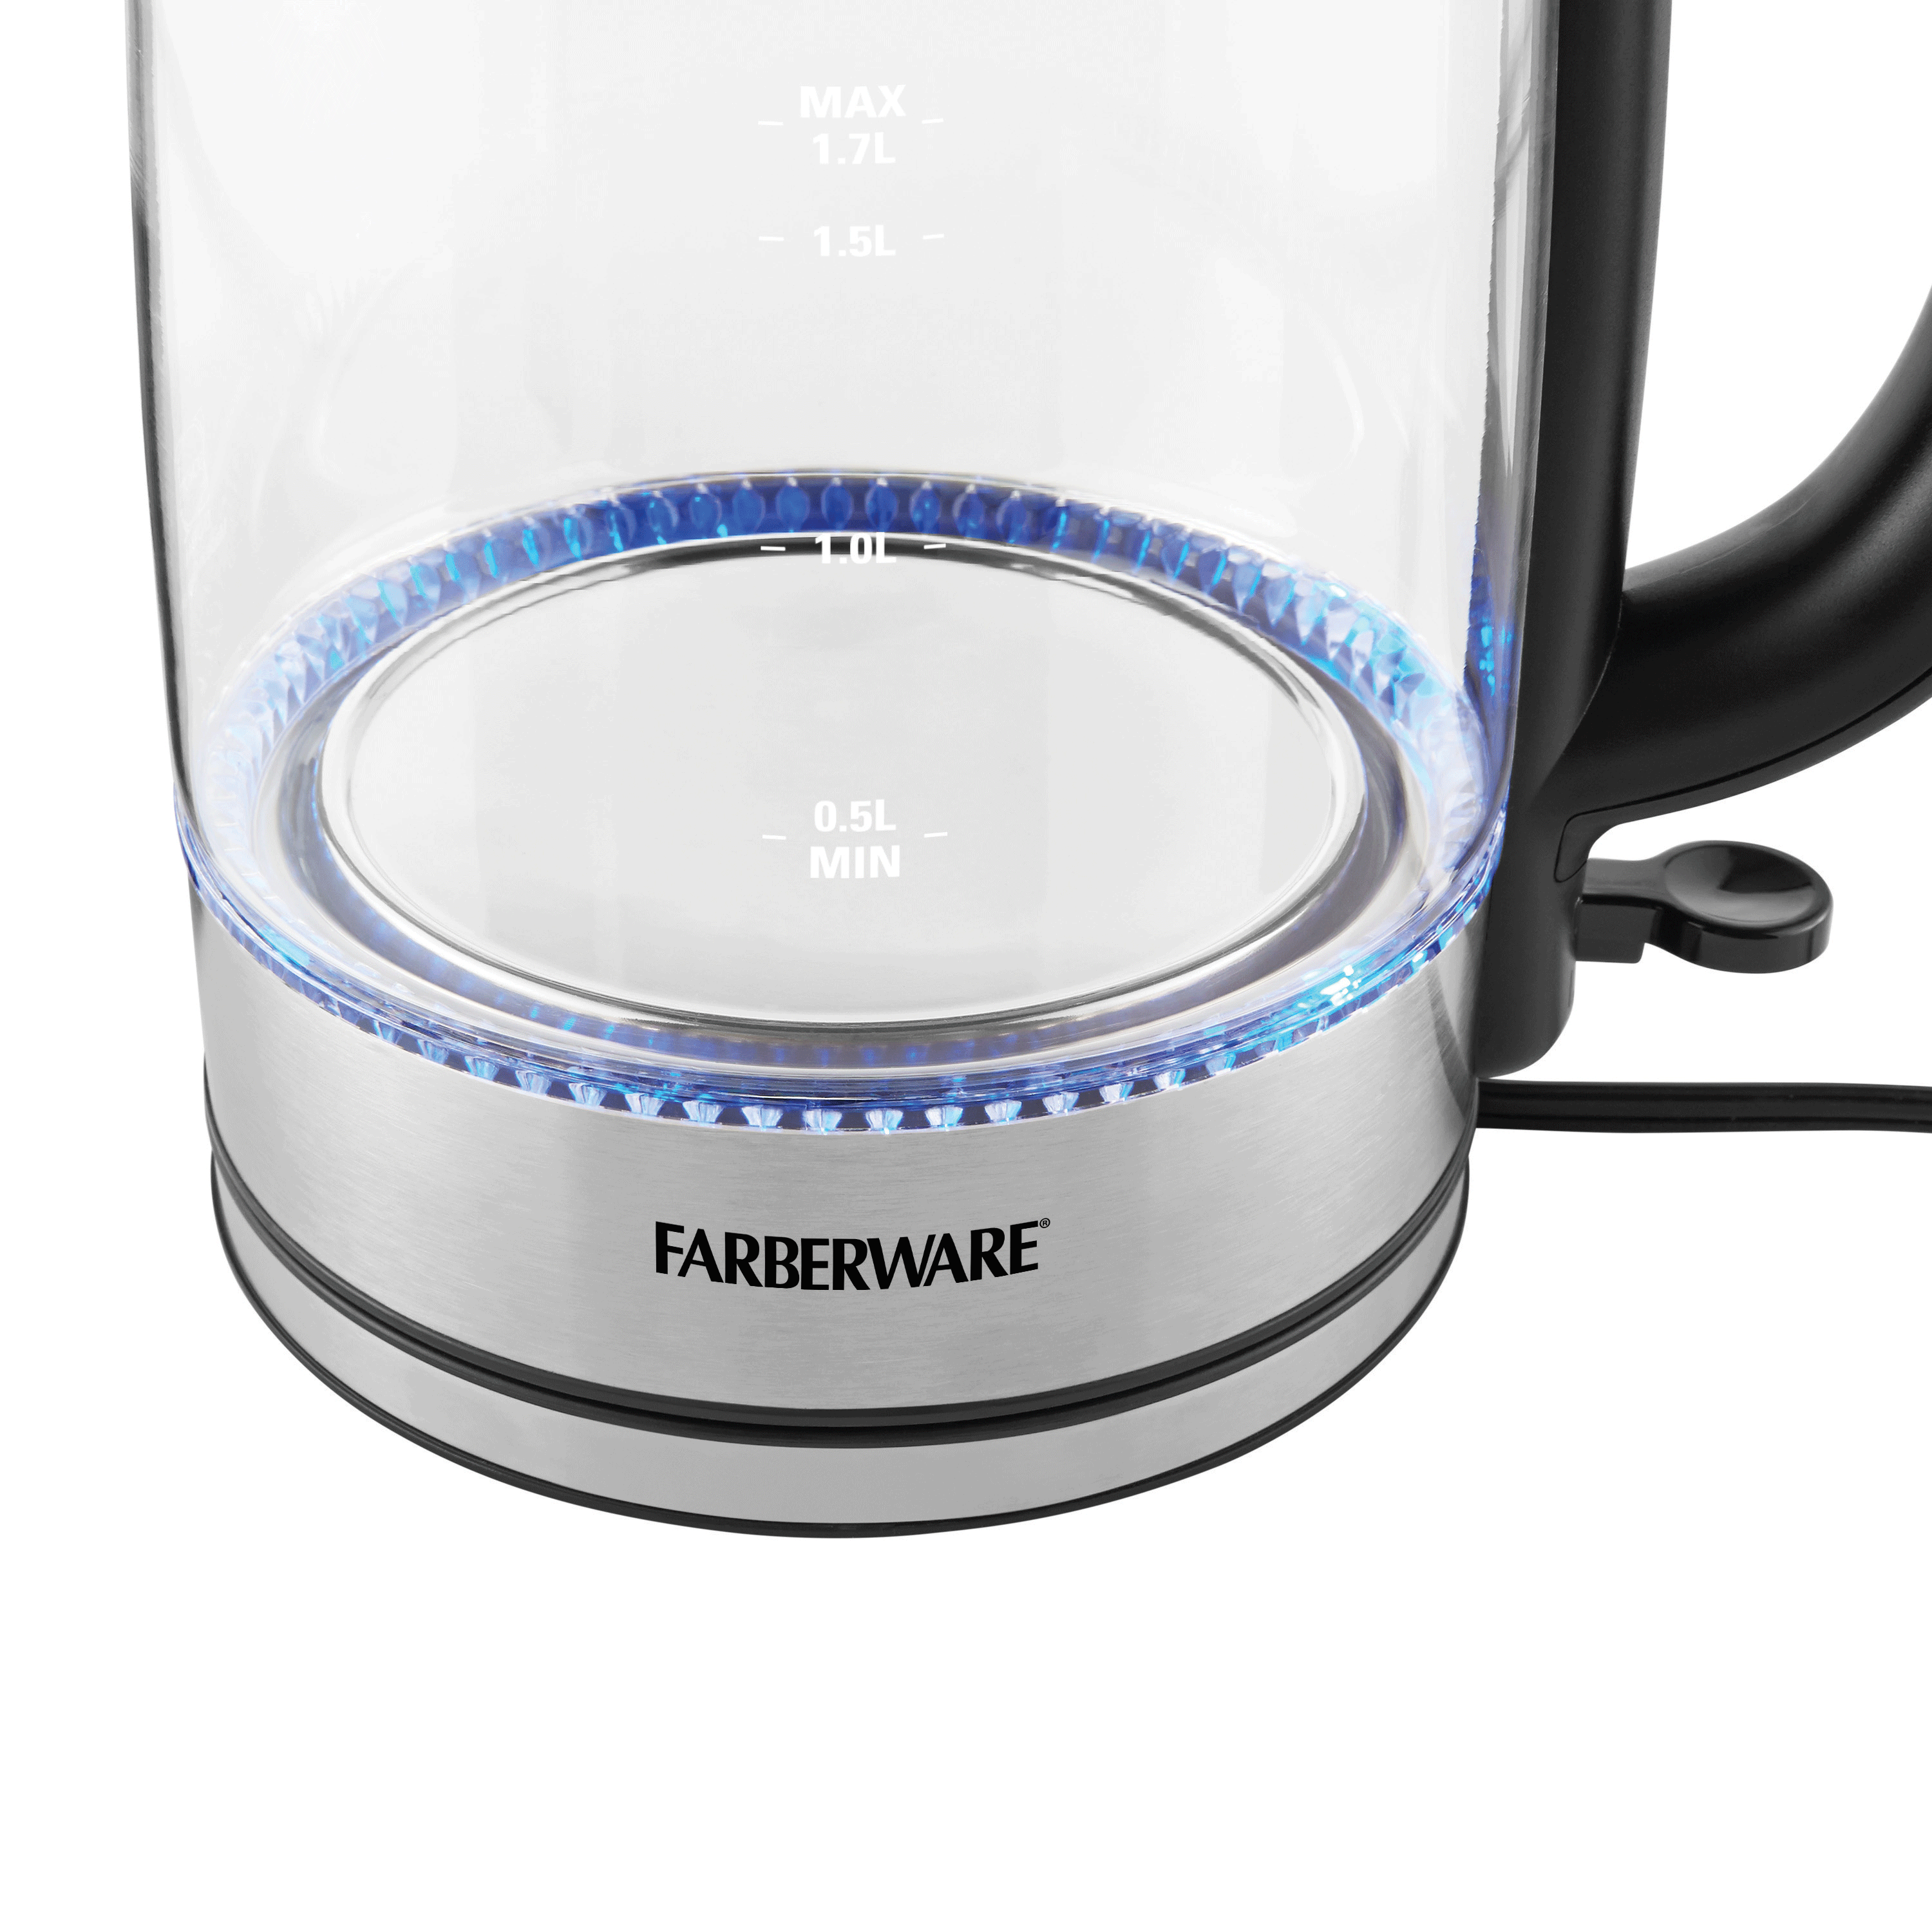 Farberware Royal Glass and Stainless Steel 1.7 Liter Electric Tea Kettle, Cordless - image 4 of 6